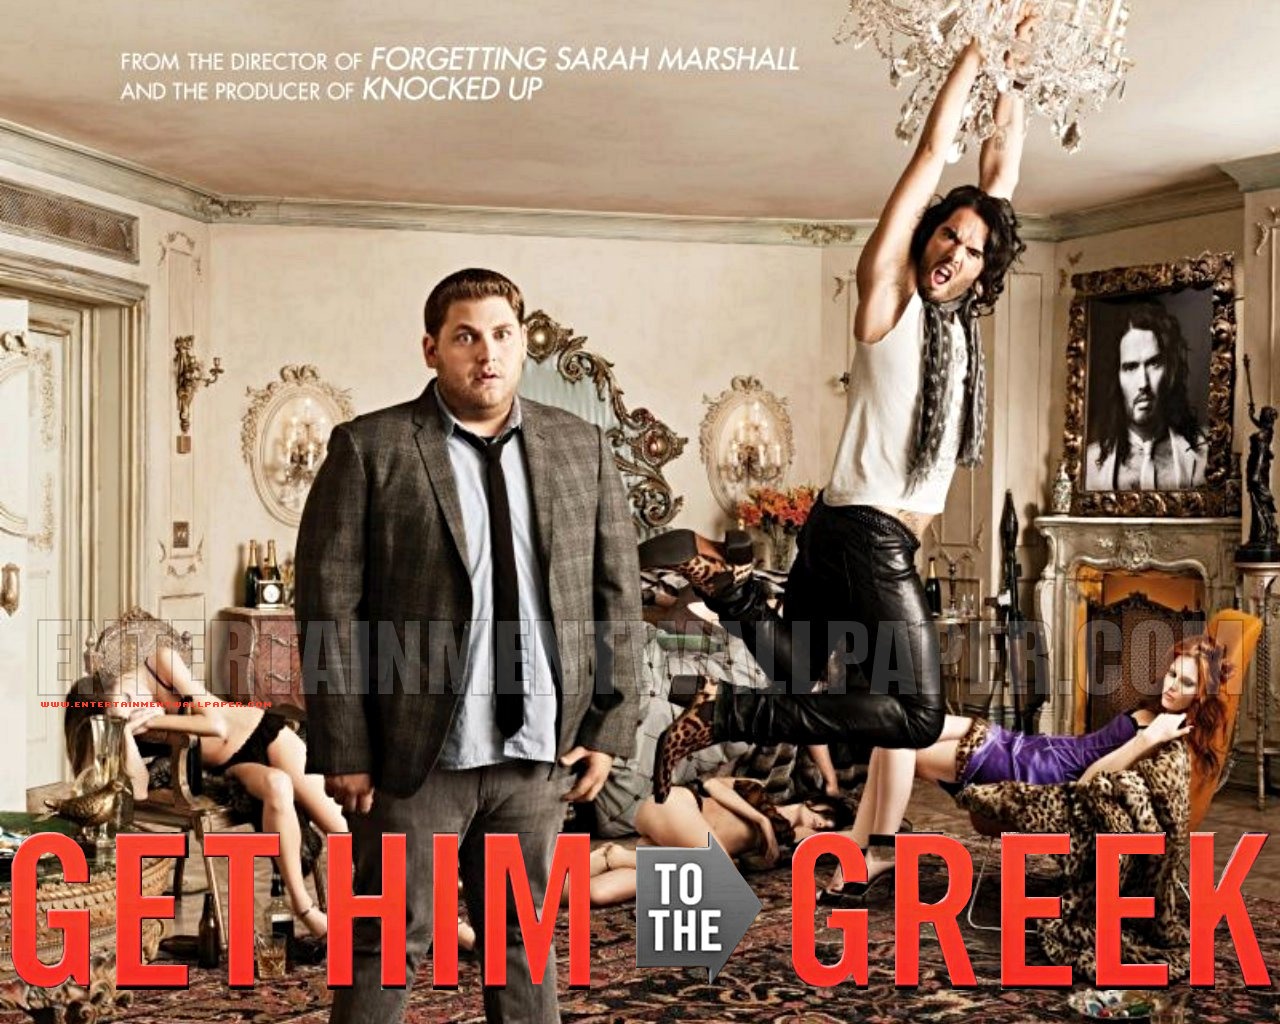 Get Him to the Greek 前往希腊剧院15 - 1280x1024